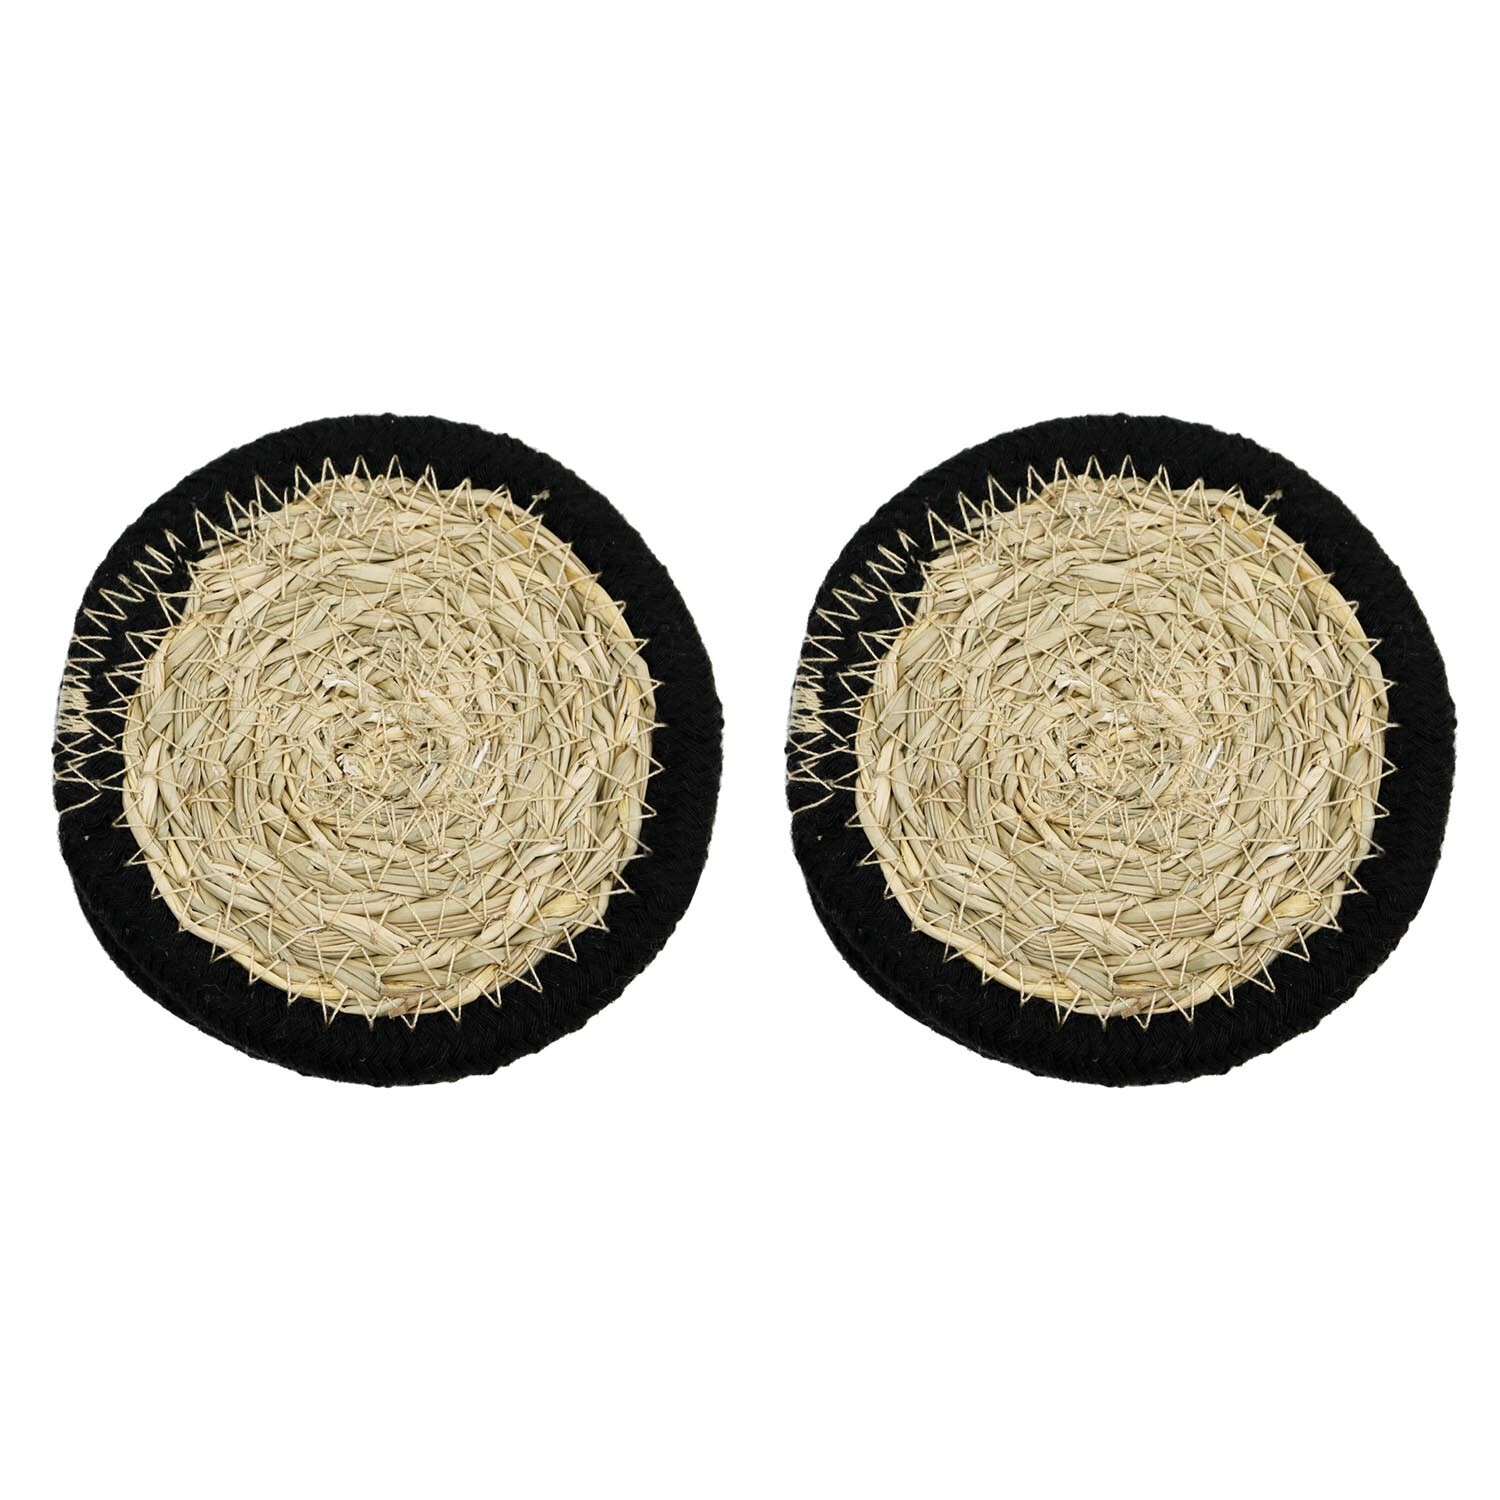 Pack of 4 Malmo Woven Edge Coasters - Brown & Black Image